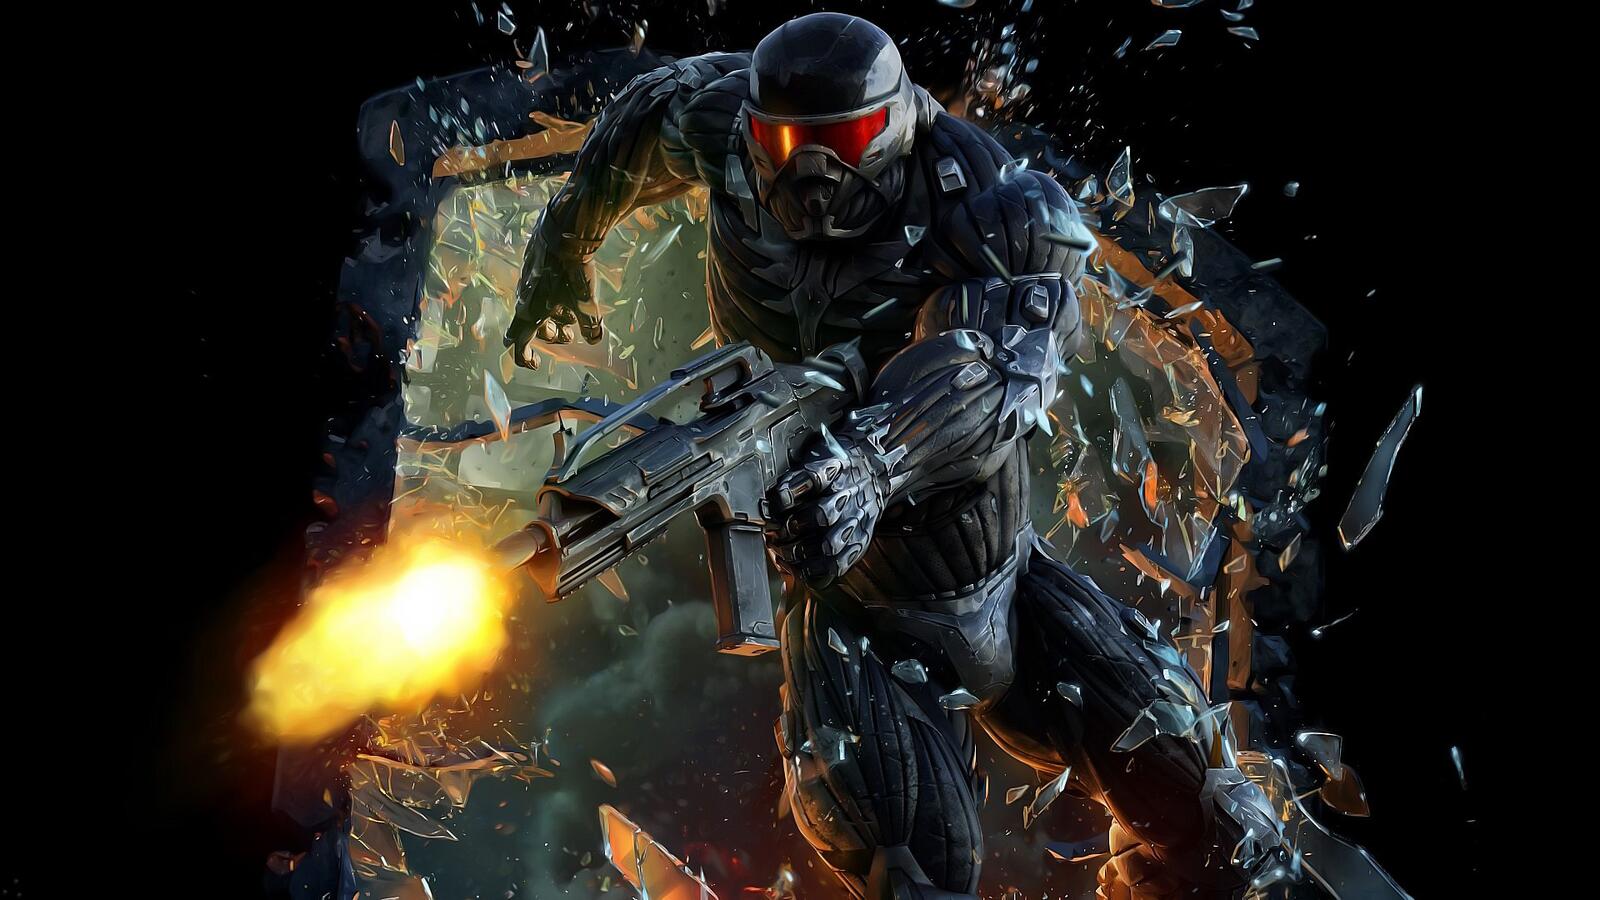 Free photo Wallpaper with Stormtrooper from Crysis 3